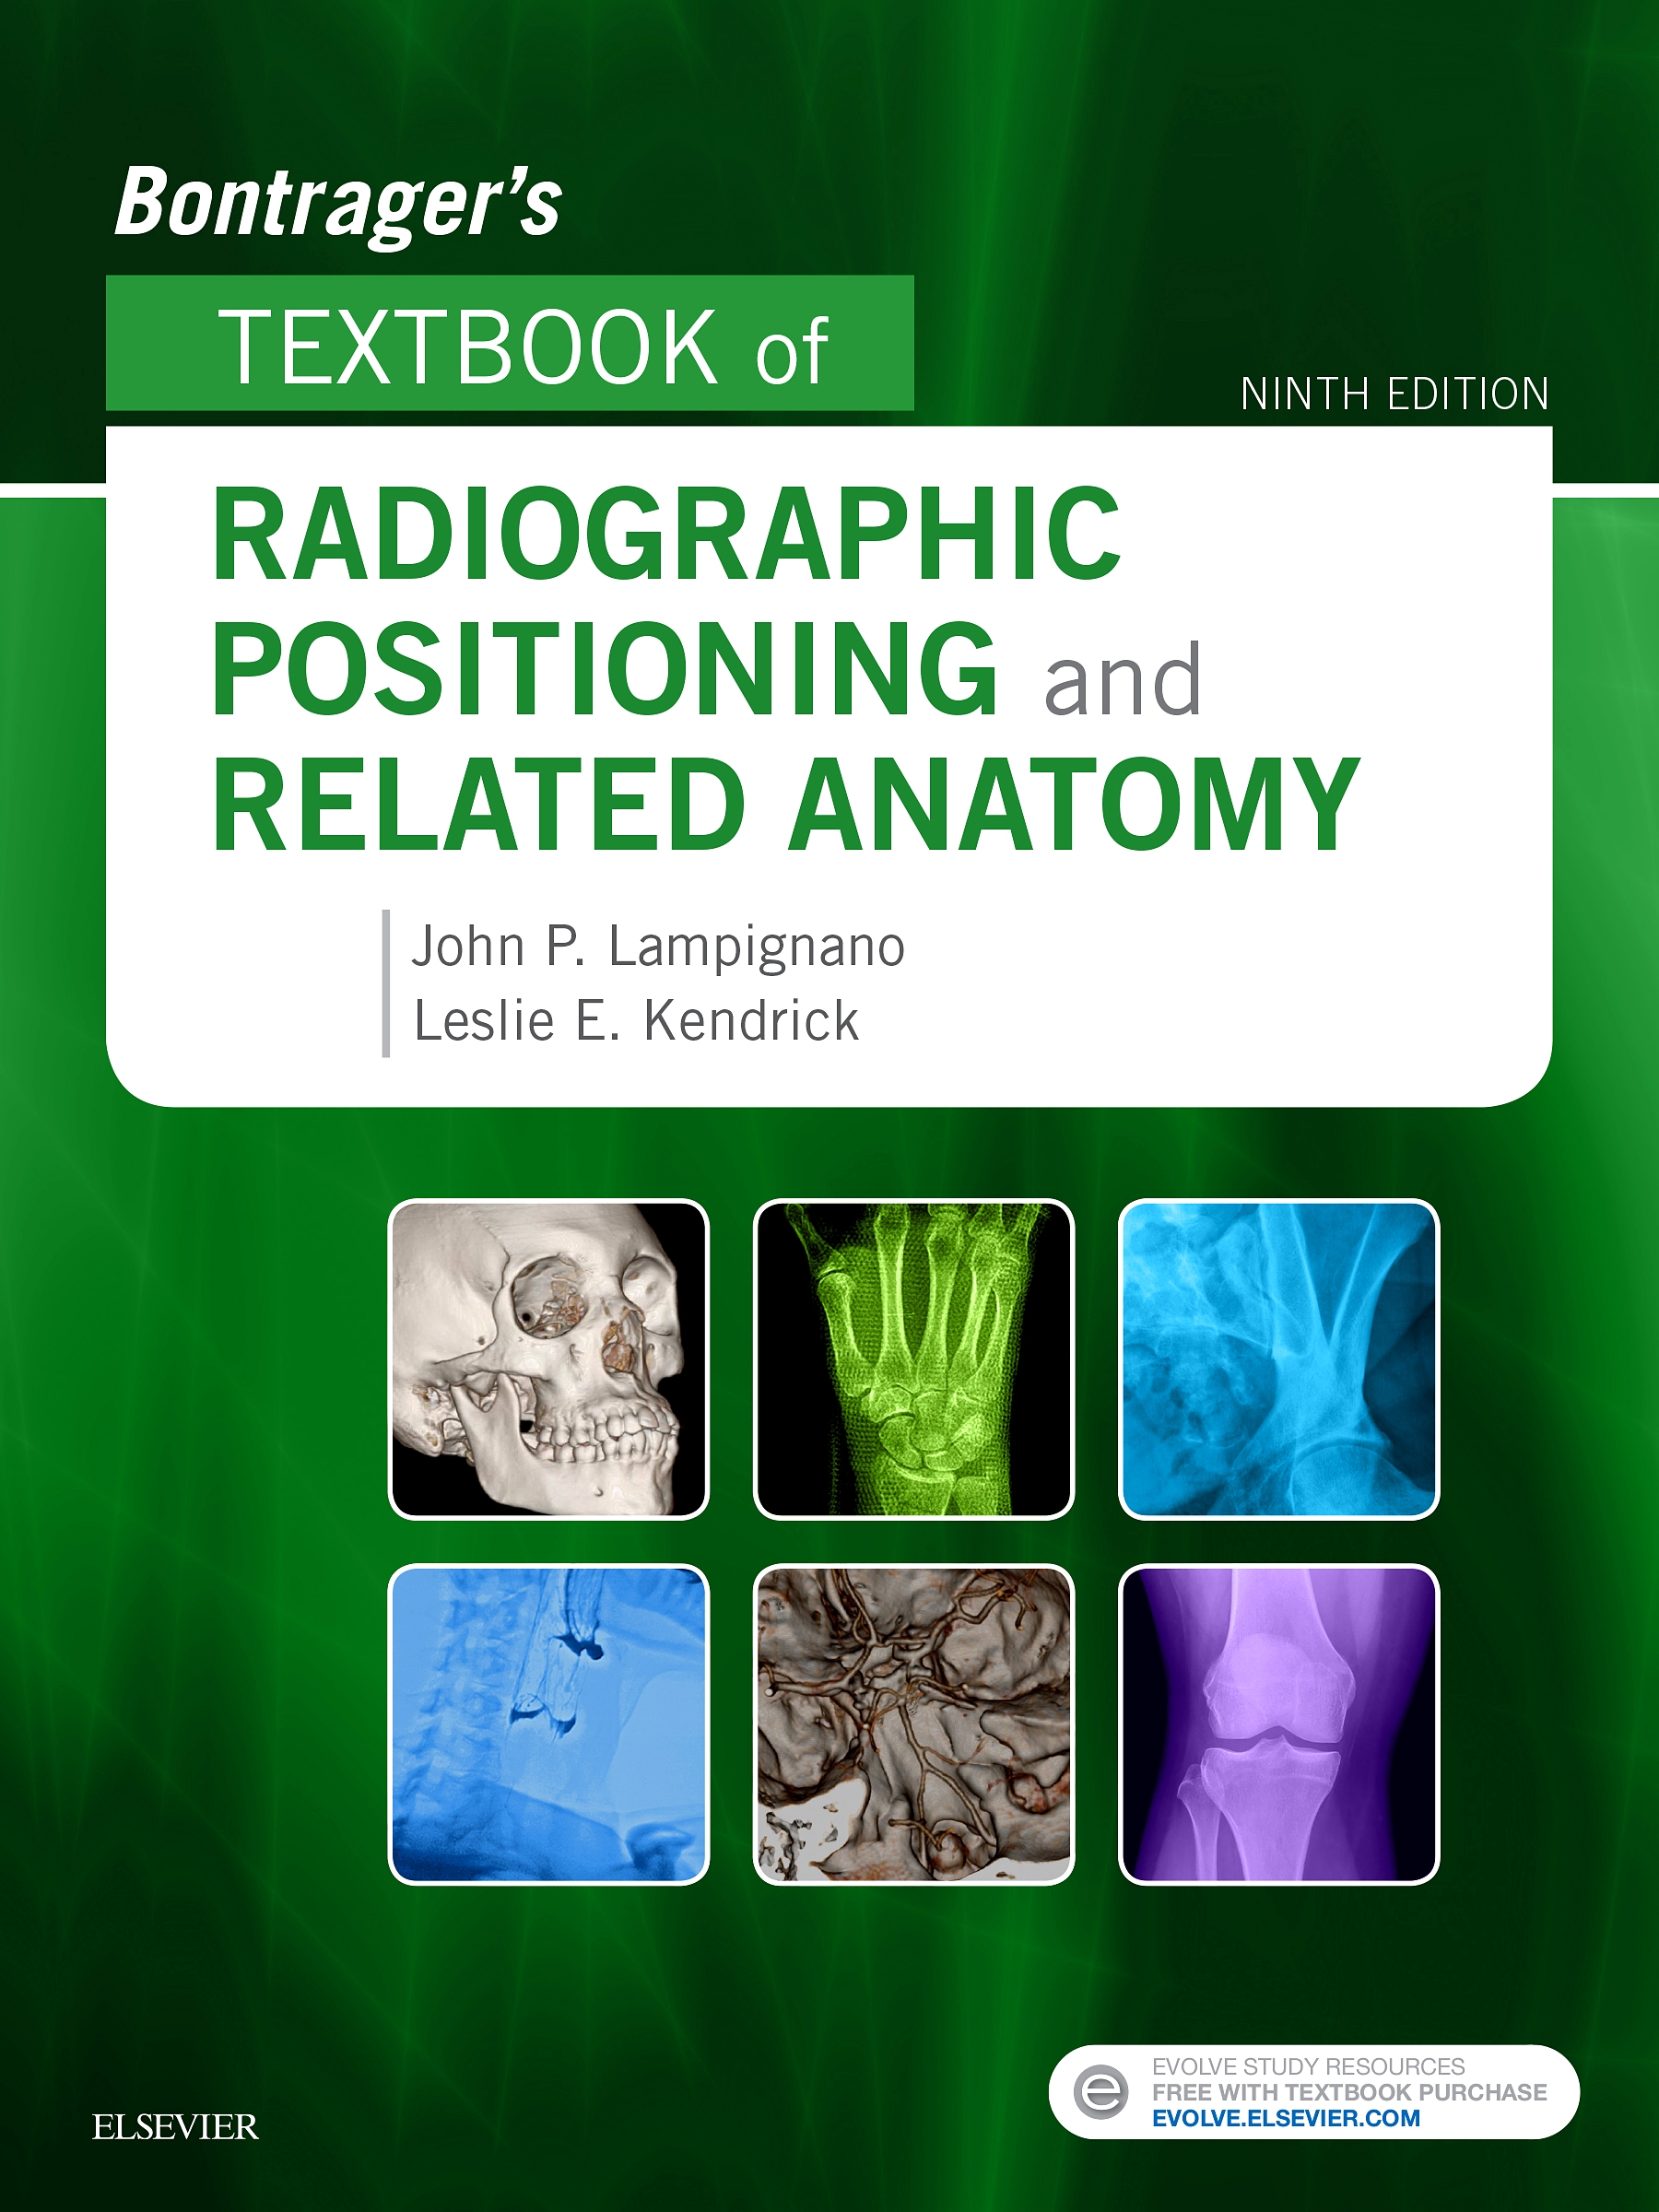 Evolve Resources for Bontrager's Textbook of Radiographic Positioning and Related Anatomy, 9th Edition